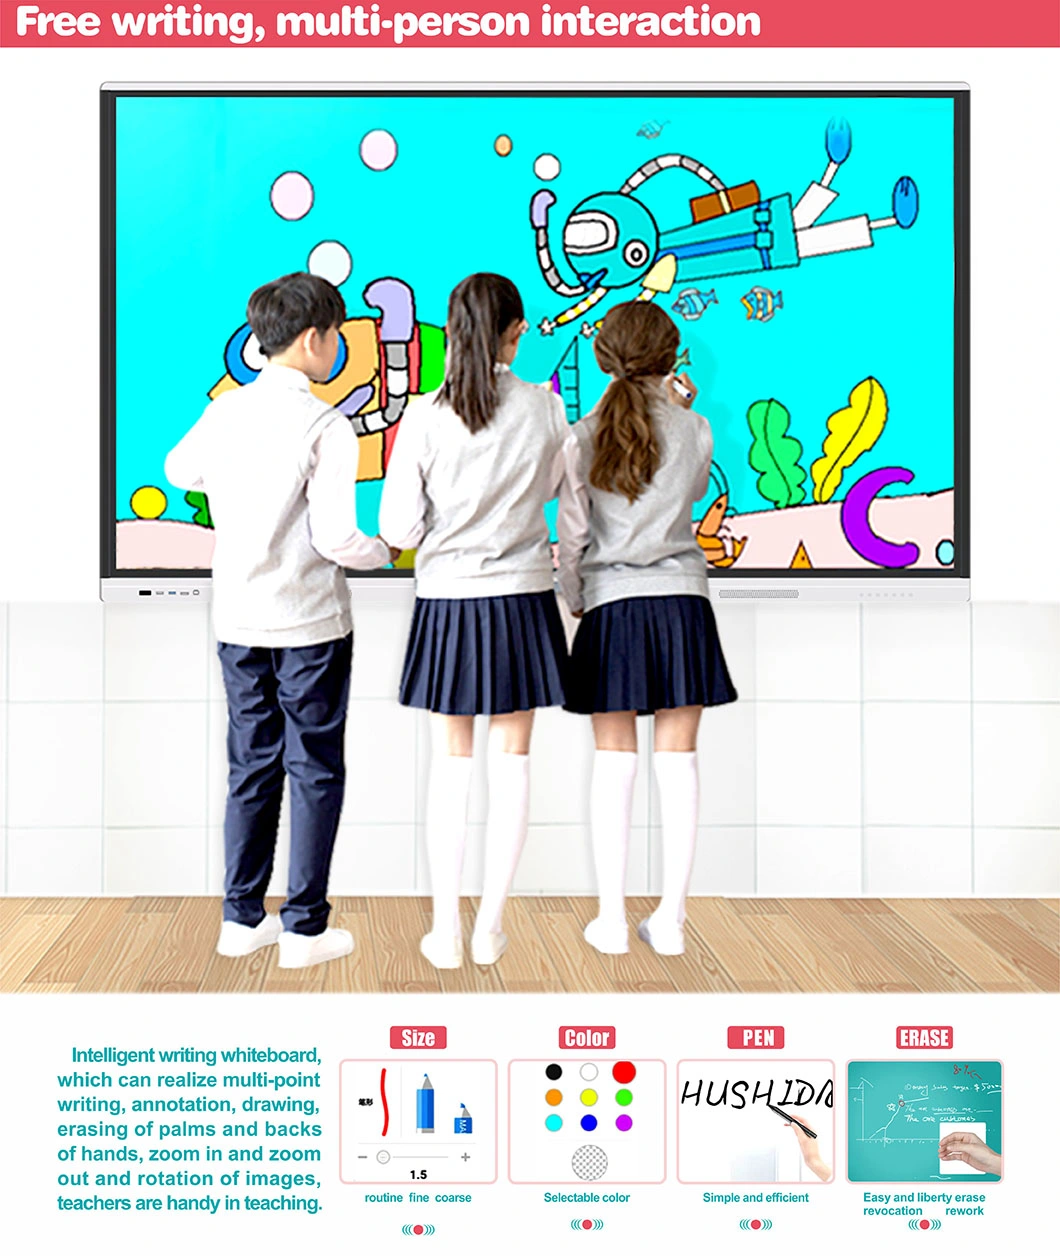 T6 Series 75 Inch Touch Screen Digital Meeting Panel Whiteboard Smart Board Interactive Display Education Training